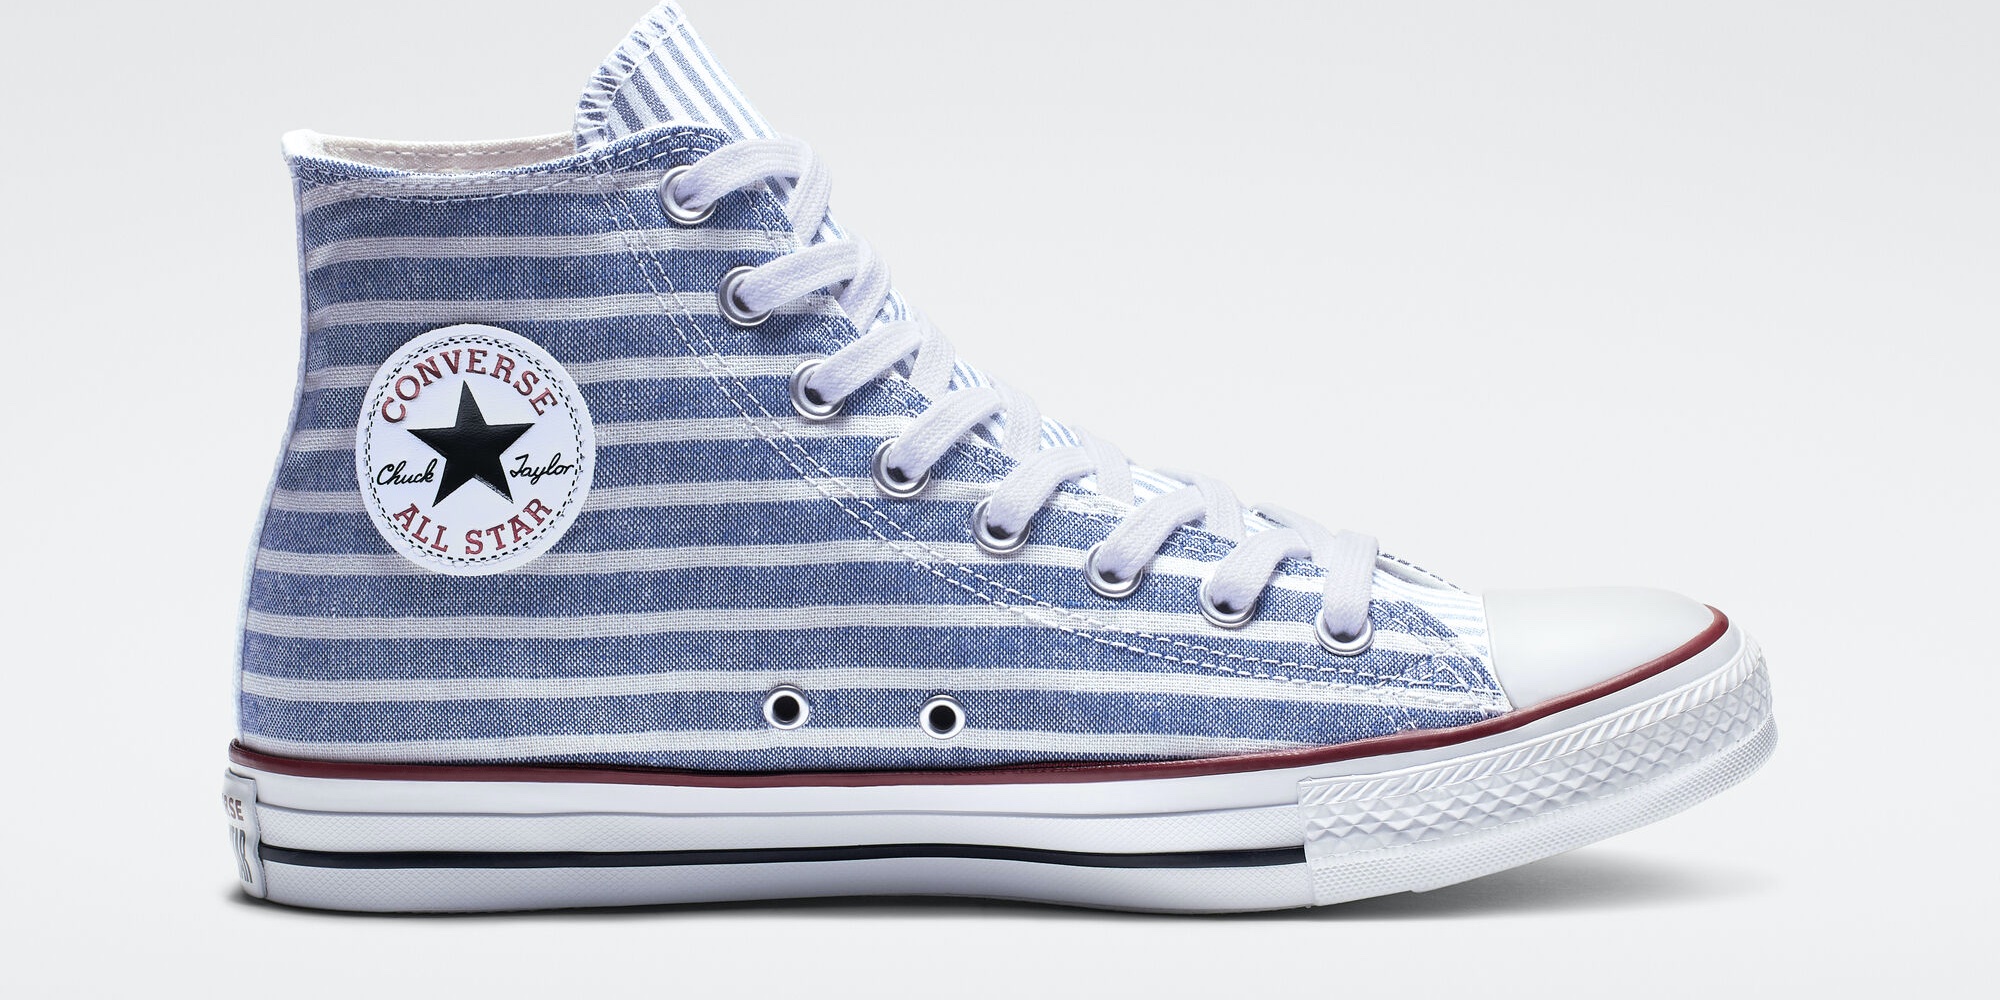 Converse discounts select footwear by 